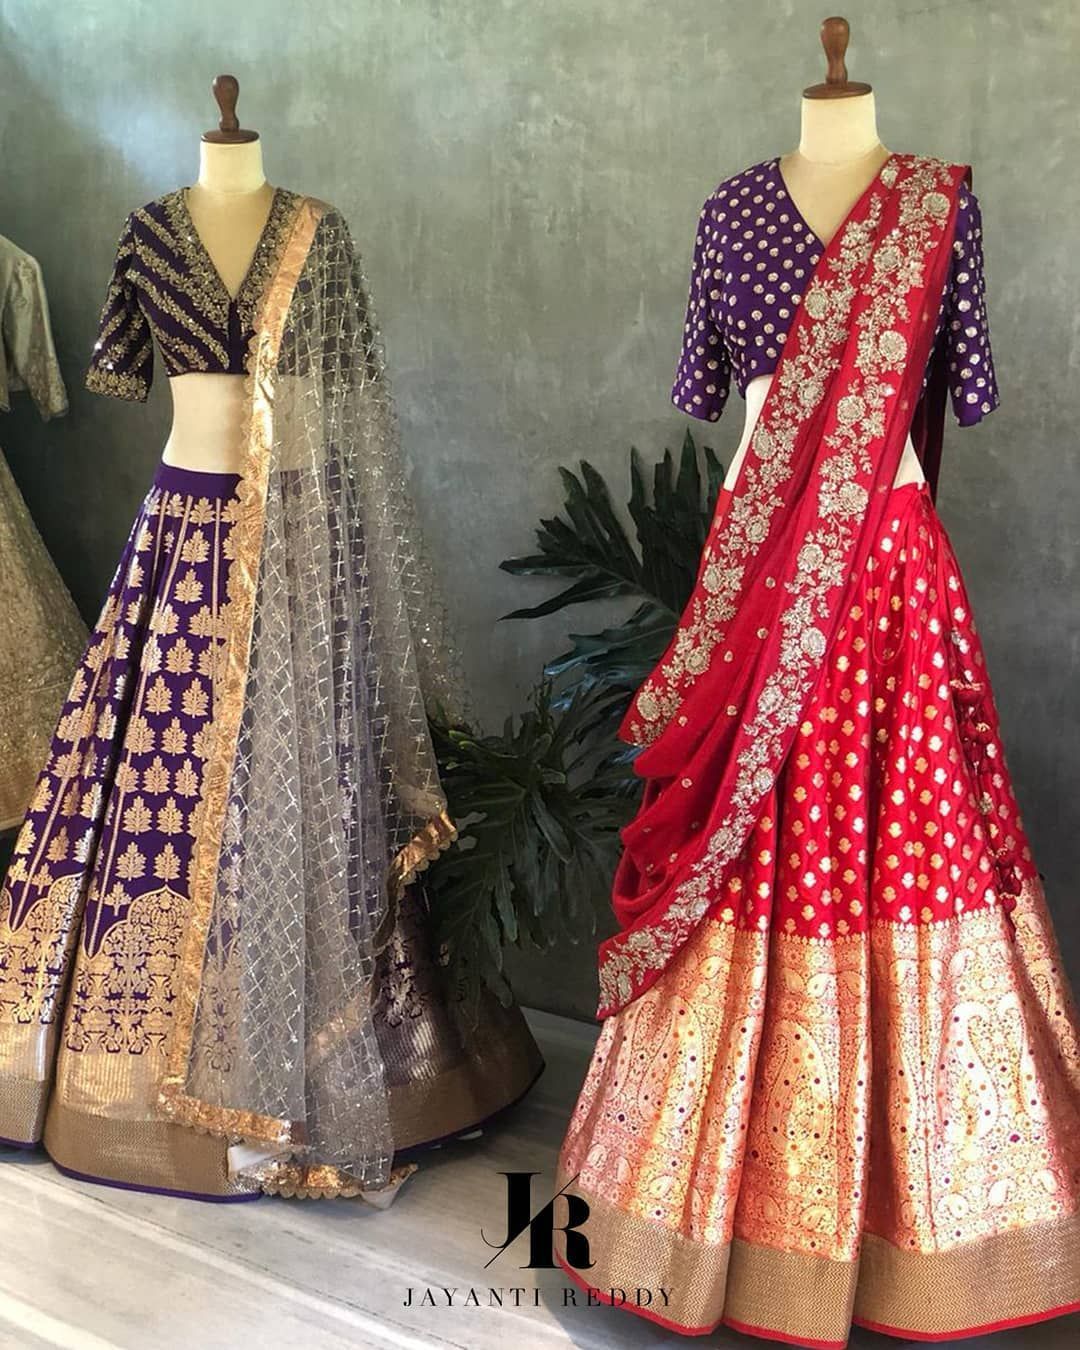 Jayanti Reddy Summer Lehengas | 2019 Bridal Collection + Prices - Frugal2Fab -   12 dress Indian jewels ideas